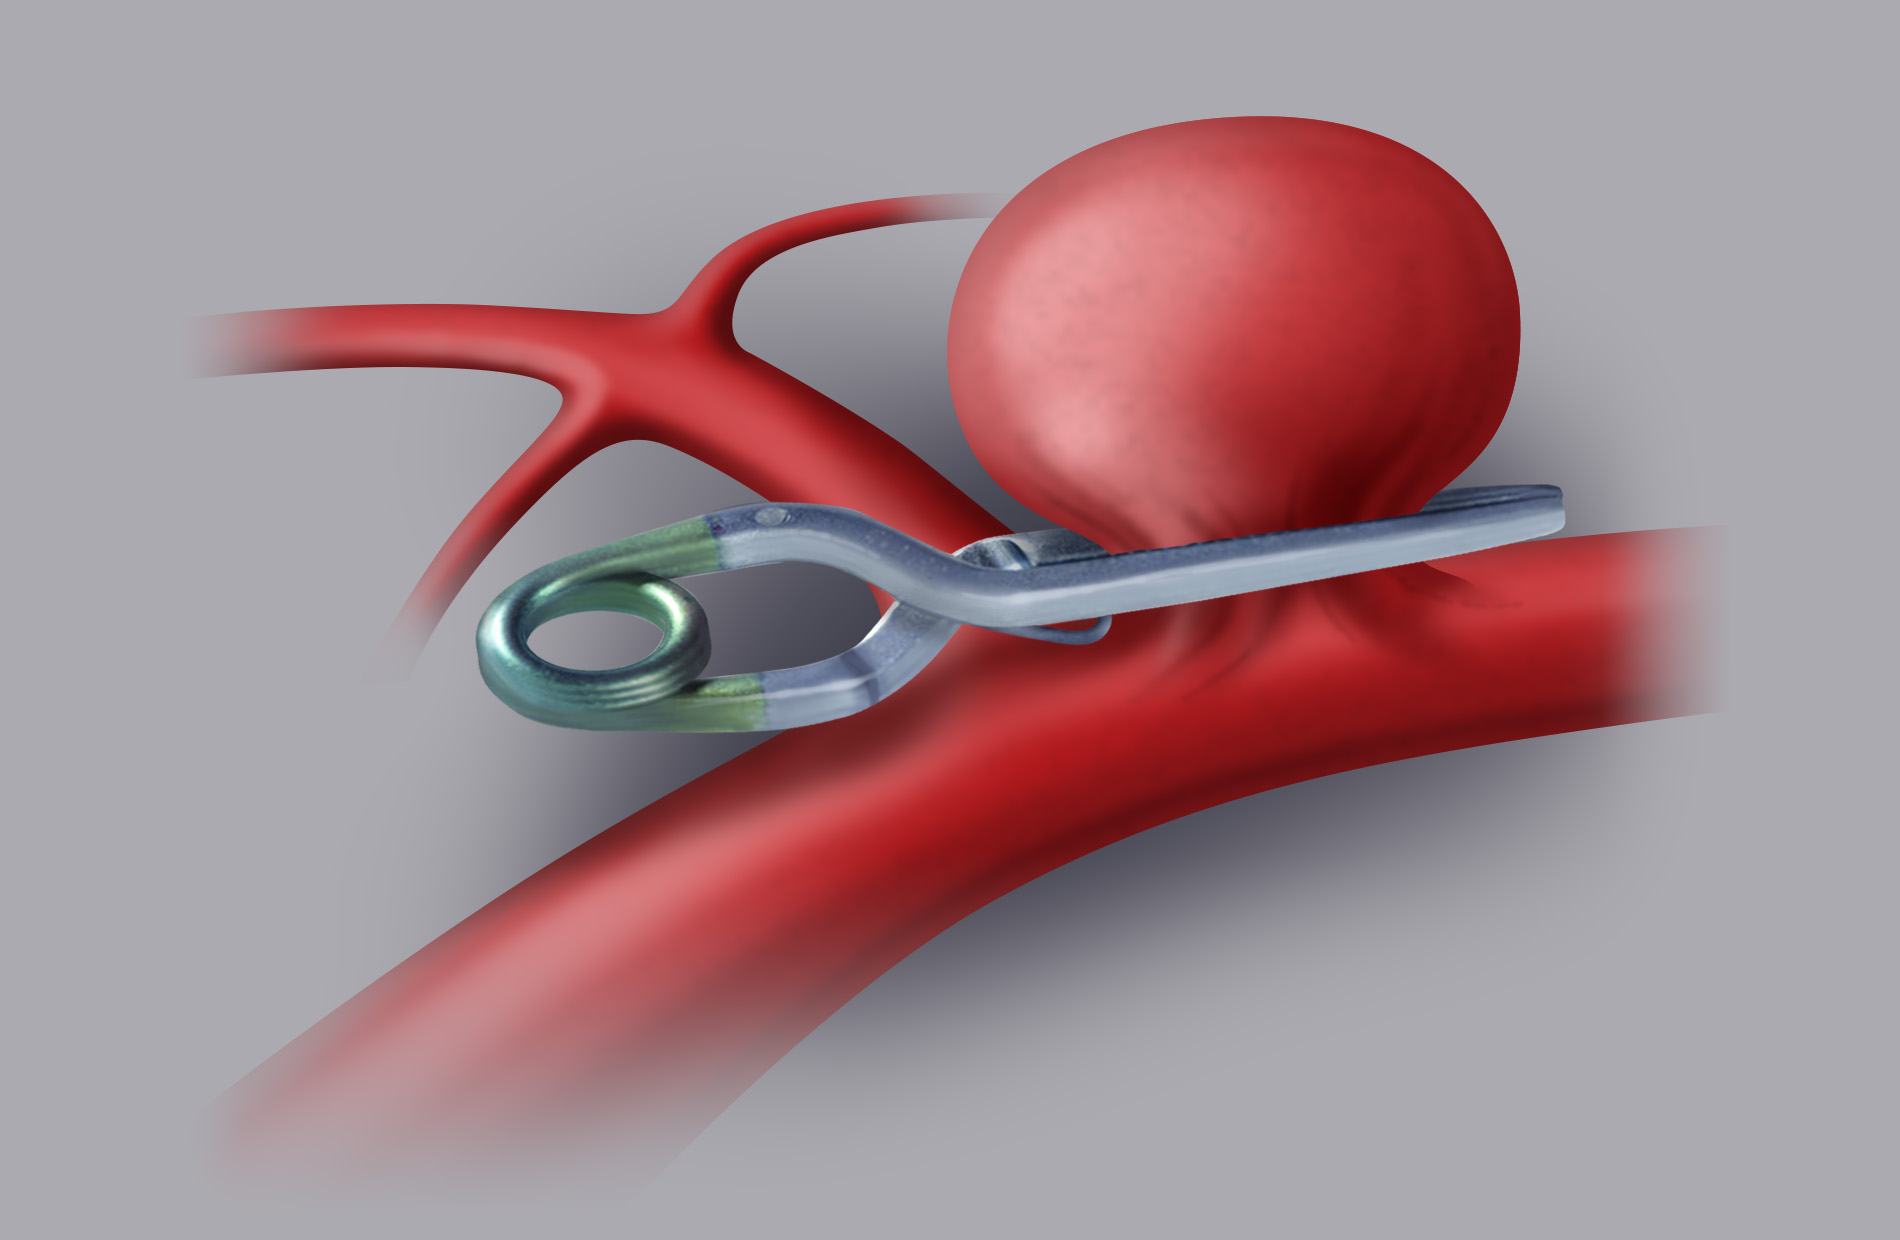 Surgical treatment (clipping). The aneurysm is excluded from cerebral circulation by applying one  or more clips (small titanium clips) on the neck of the aneurysm.